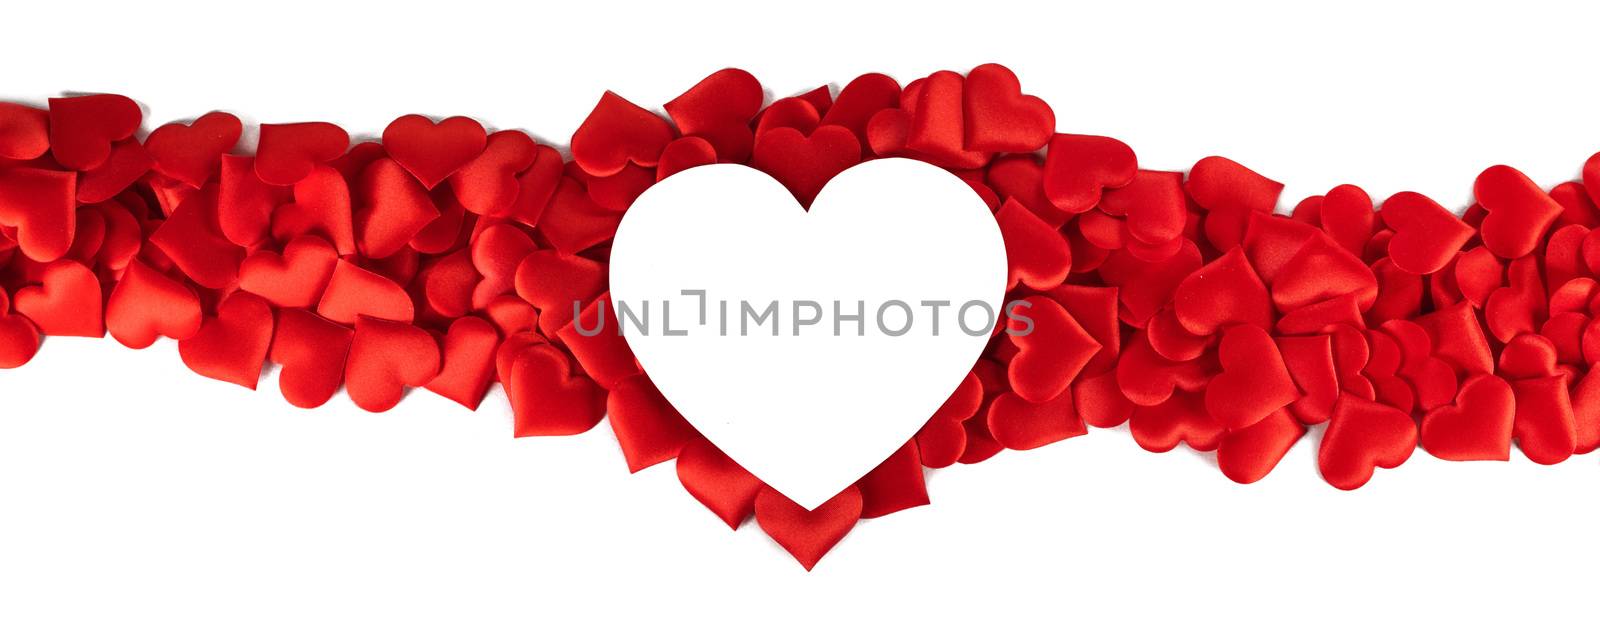 Valentine's day many red silk hearts and white heart shaped card isolated on white background, love concept